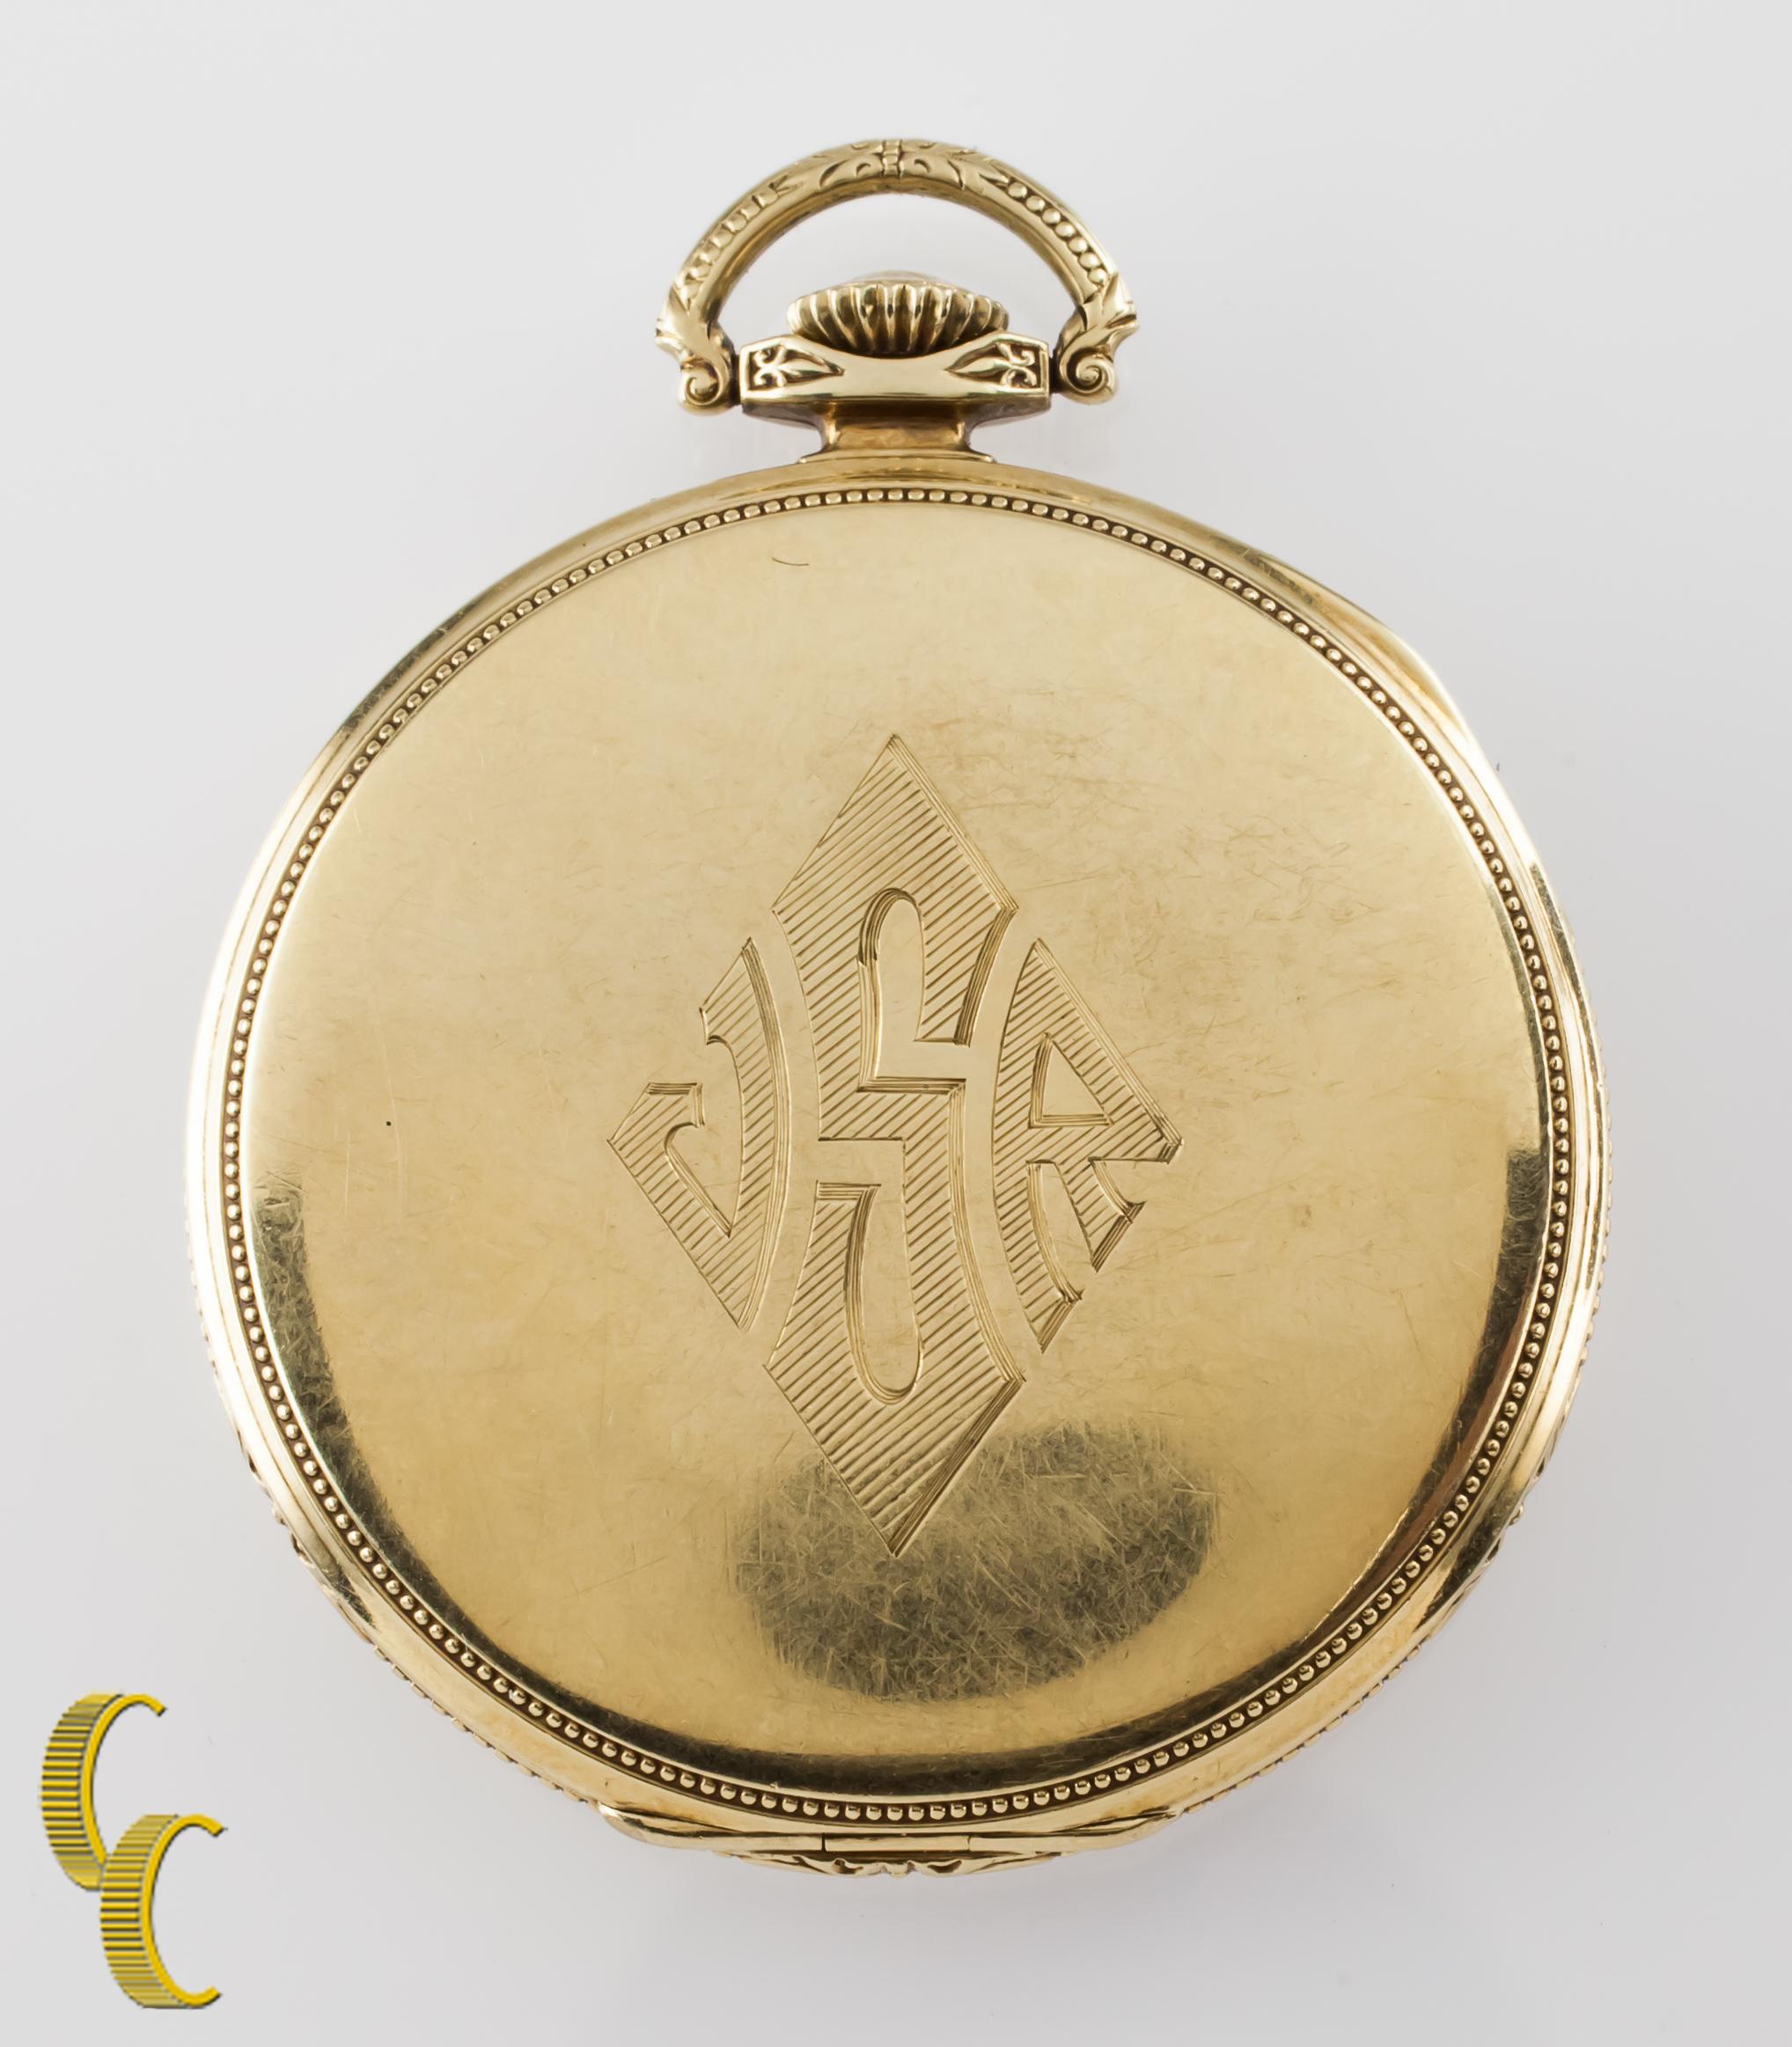 Beautiful Antique Elgin Pocket Watch w/ Champagne Dial Including Gold Hands & Dedicated Second Dial
14k Yellow Gold Case w/ Intricate Hand-Etched Design on Case. Reverse of Case is Monogrammed.
Gold Arabic Numerals
Case Serial #11887 74
17-Jewel